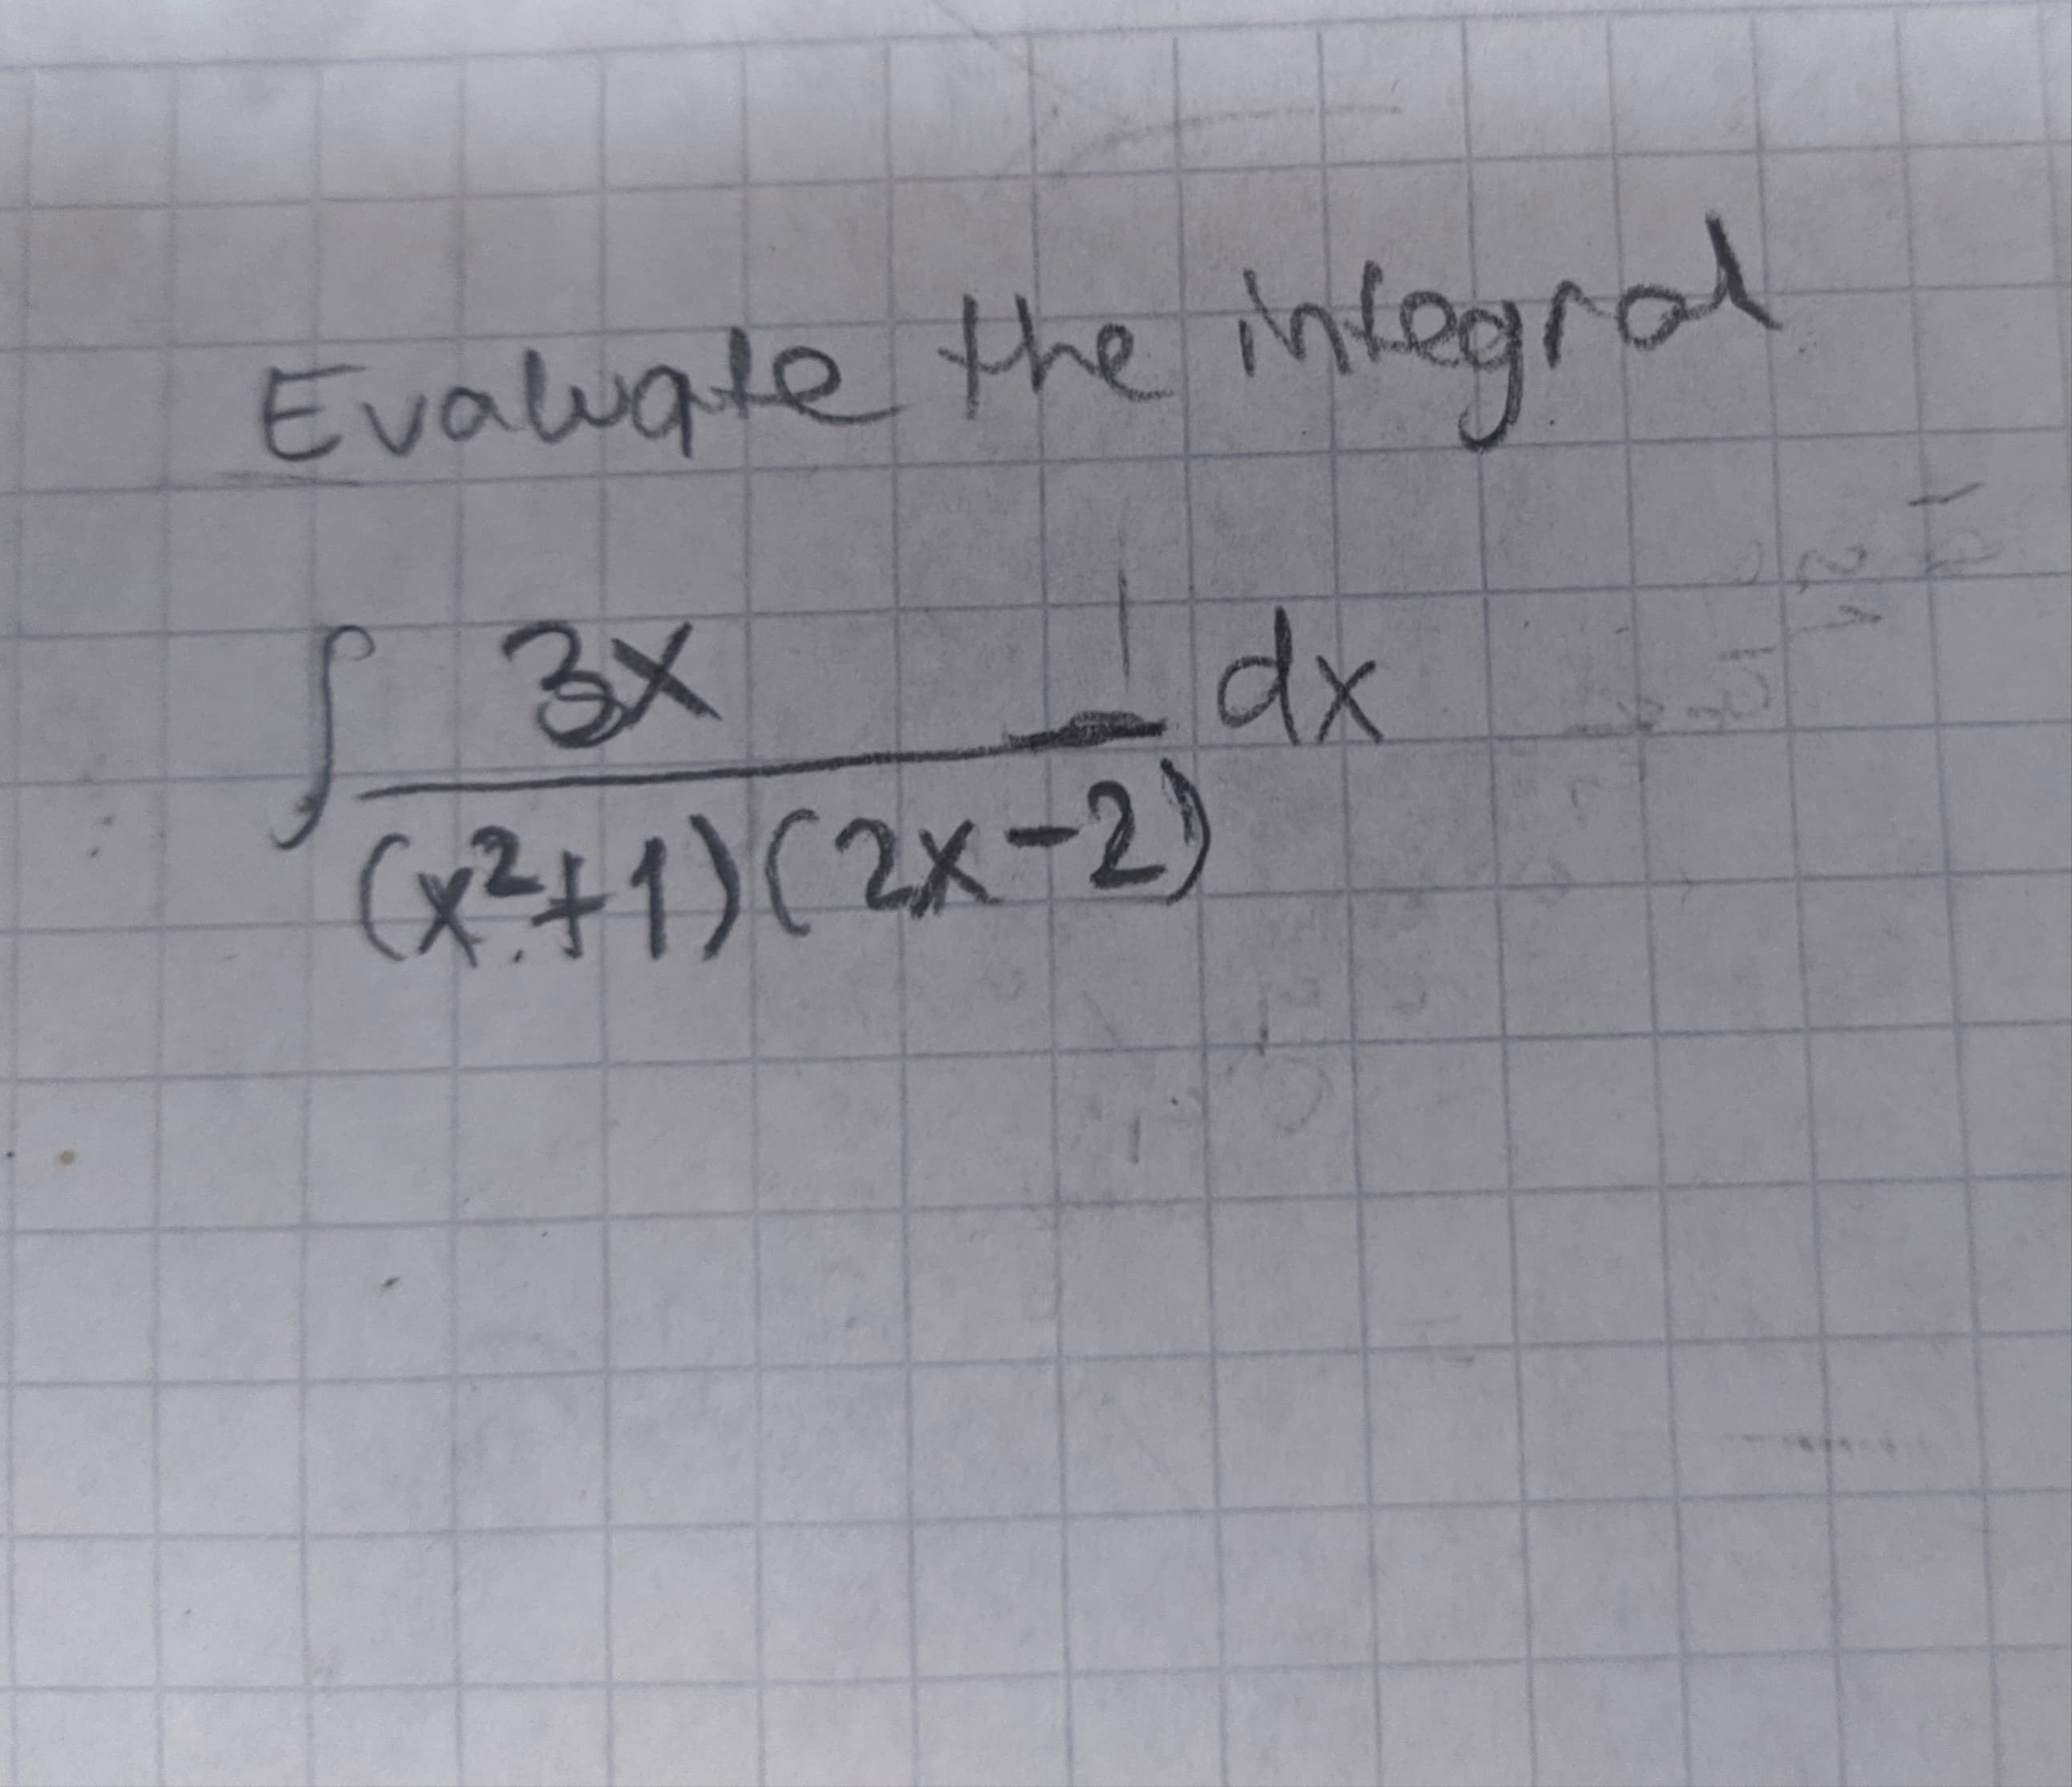 Evaluate the infegral
dx
(x341)(2X-2)
